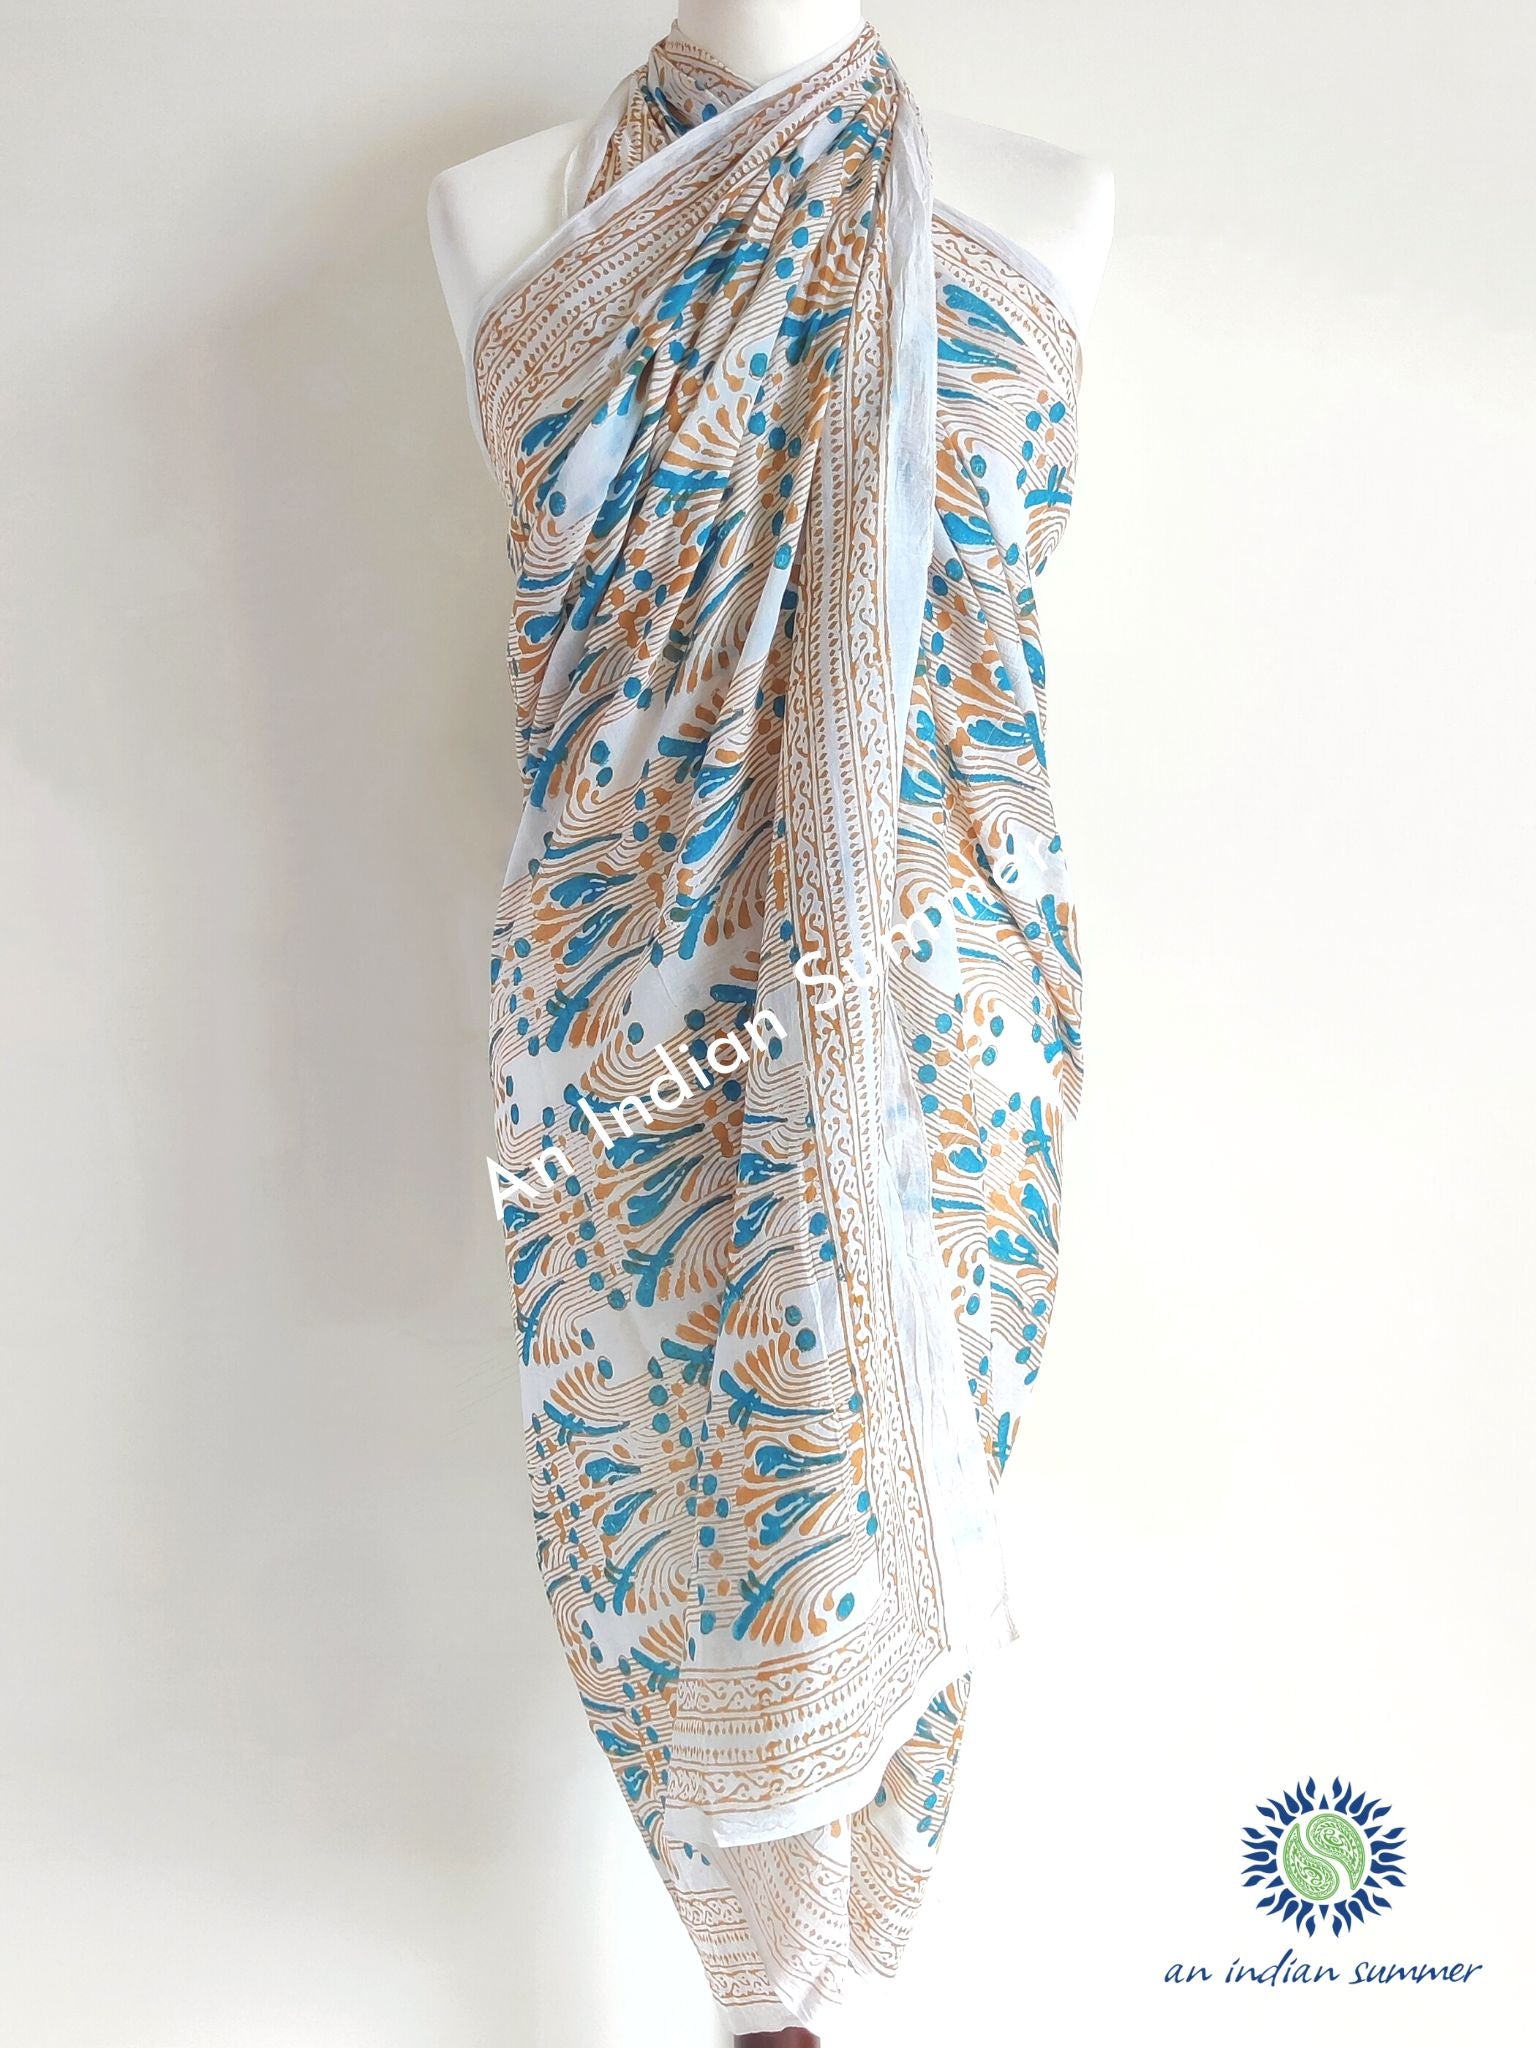 Elements Sarong Pareo | Earth Tierra | Beige Teal Abstract Print | Hand Block Printed | Soft Cotton Voile | An Indian Summer | Seasonless Timeless Sustainable Ethical Authentic Artisan Conscious Clothing Lifestyle Brand